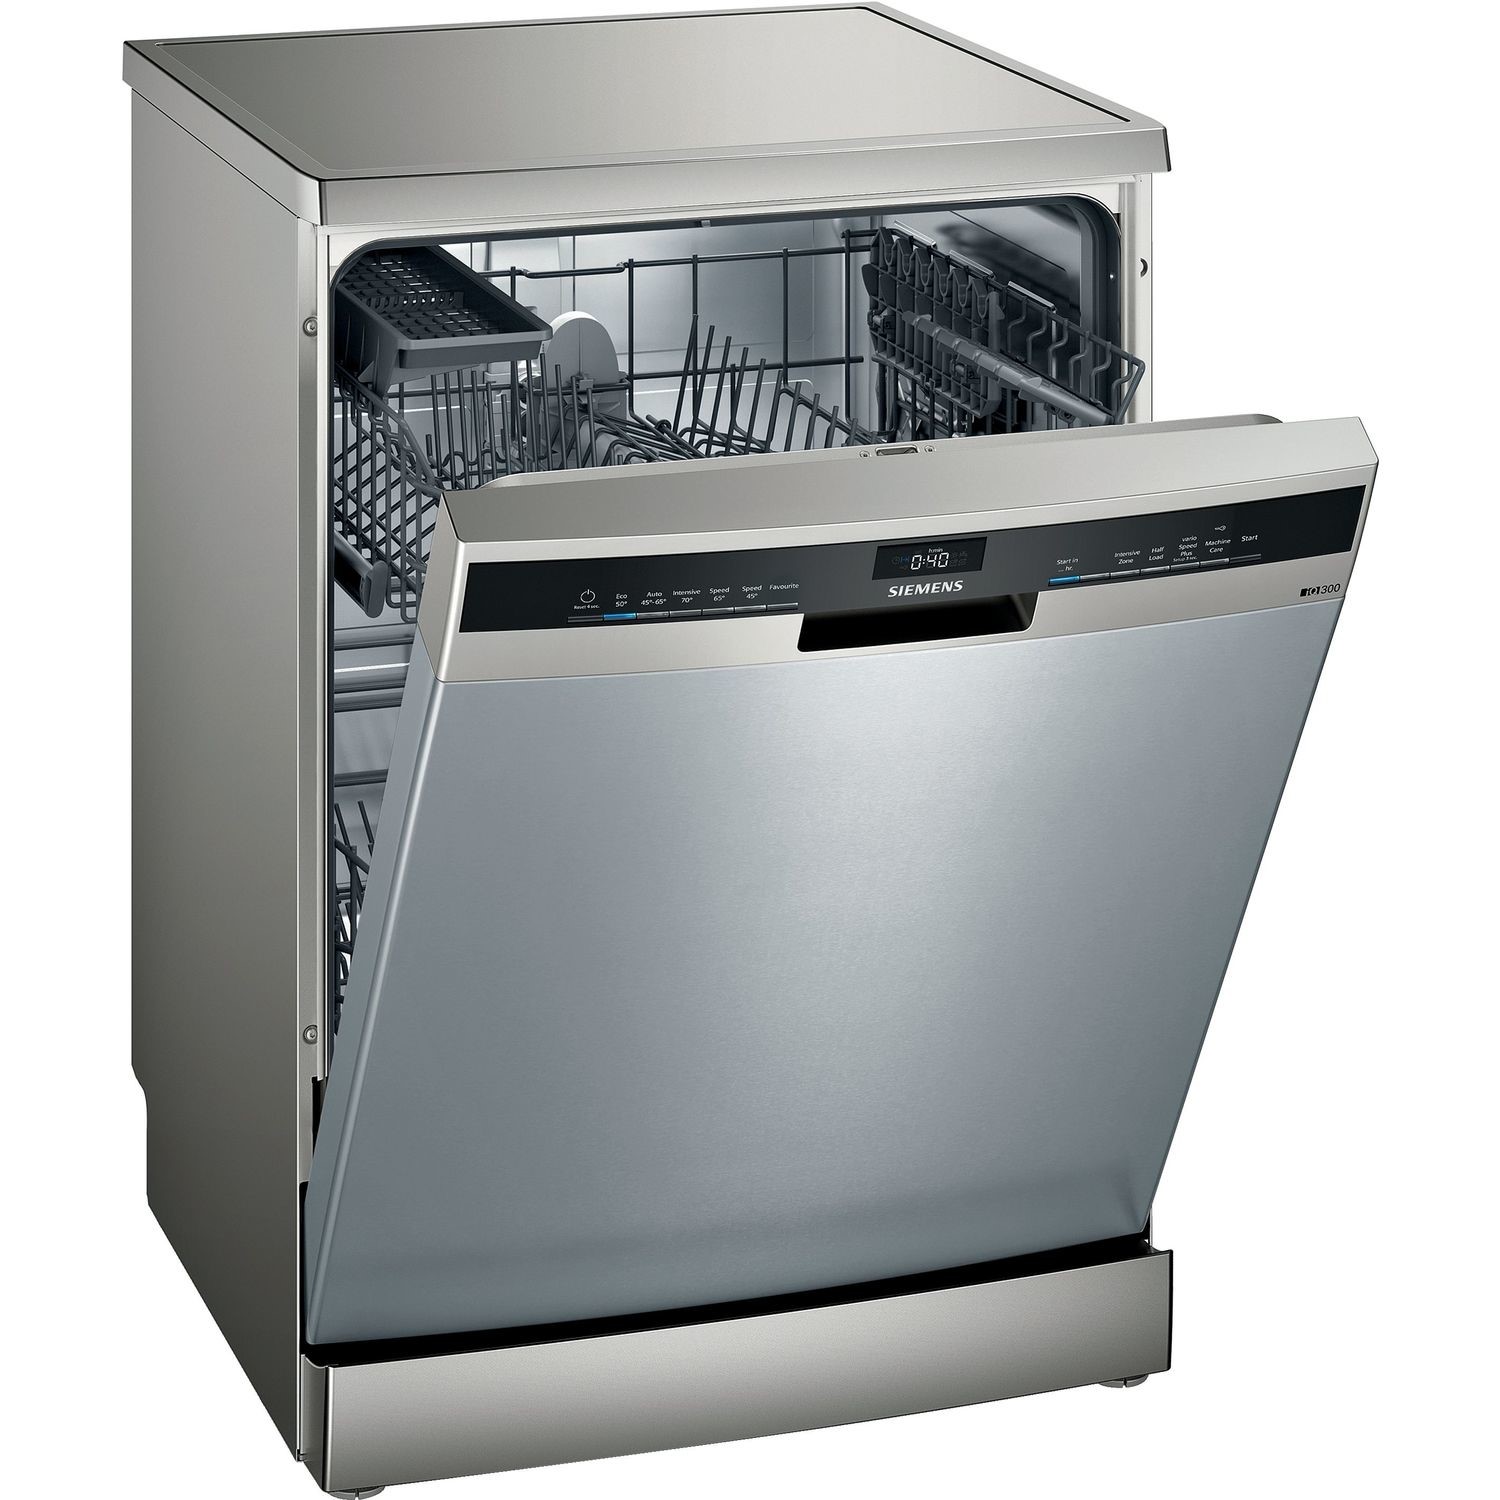 Refurbished Siemens iQ300 SE23HI60AG 13 Place Freestanding Dishwasher Silver With Stainless Steel Do